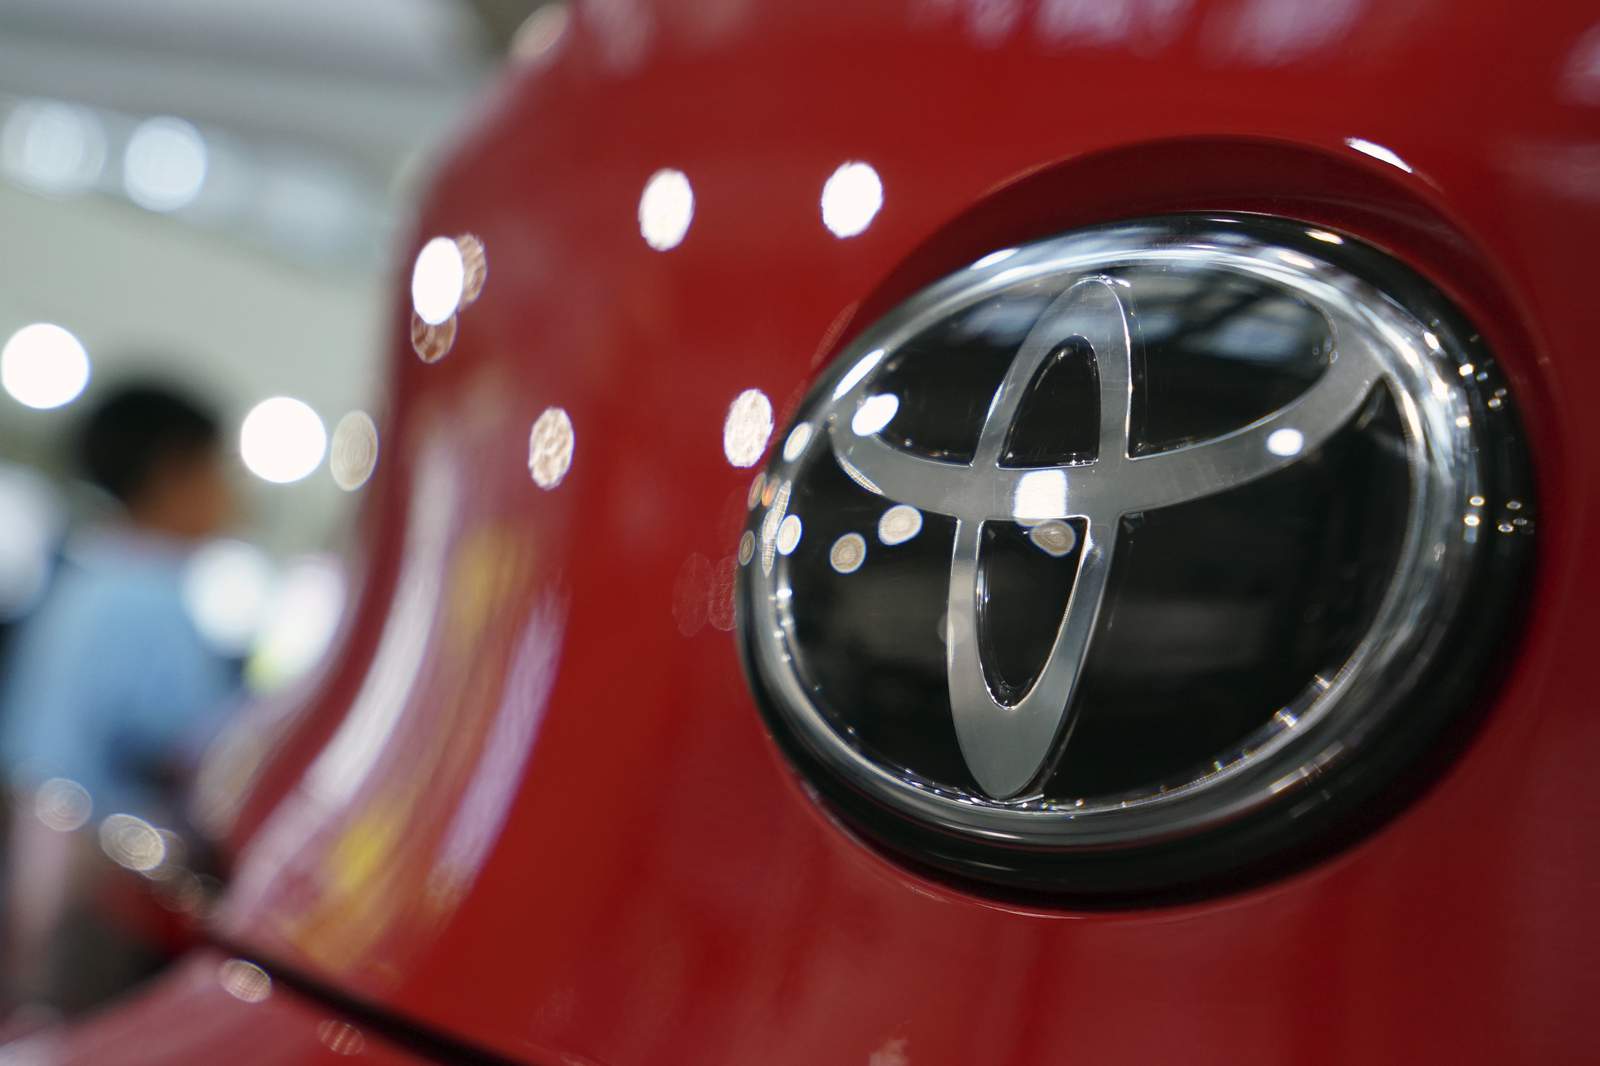 Toyota adds 1.5M US vehicles to recalls for engine stalling